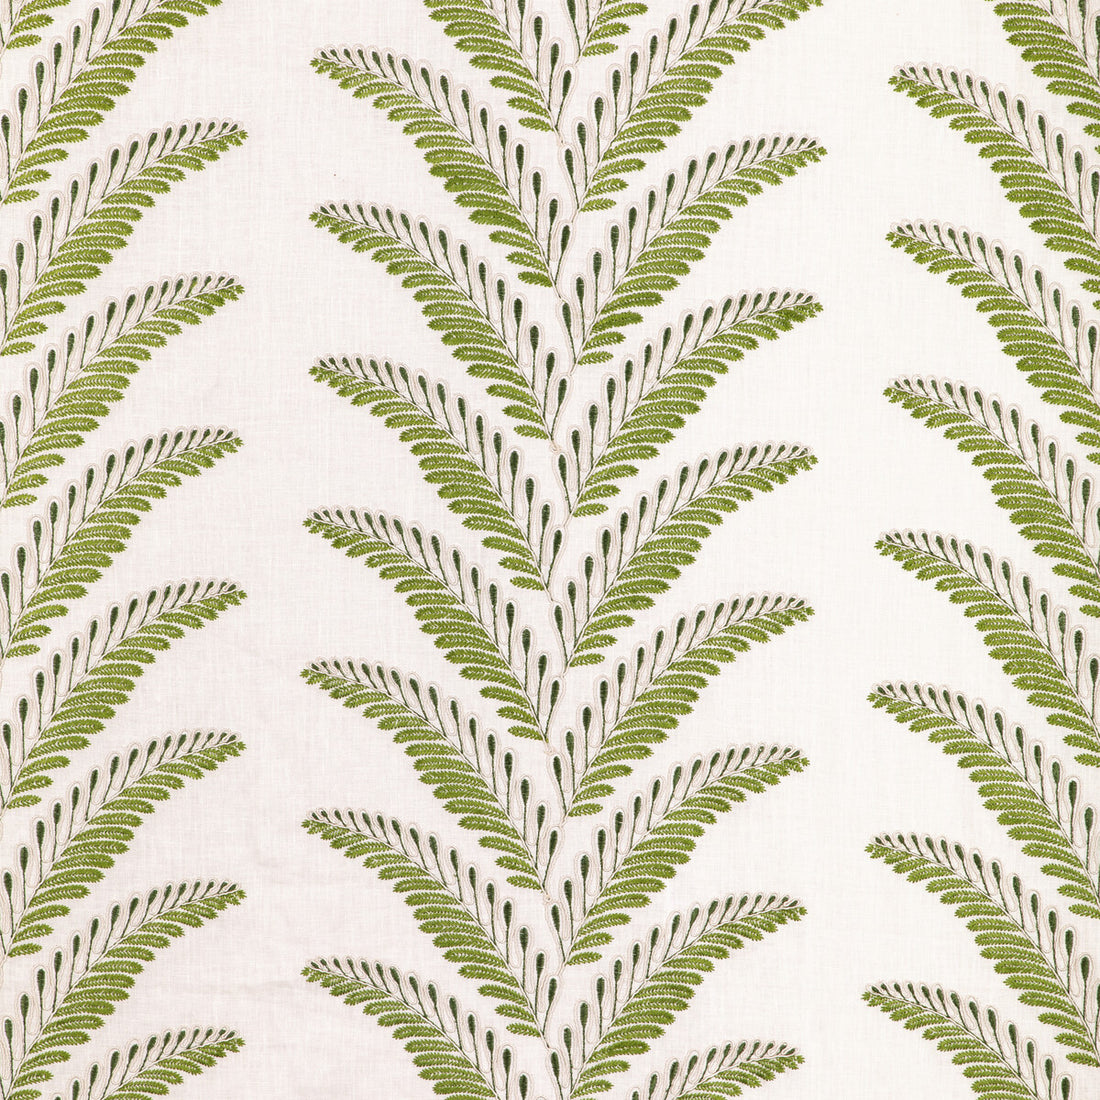 Fougere Emb fabric in leaf color - pattern 8024109.31.0 - by Brunschwig &amp; Fils in the La Menagerie collection